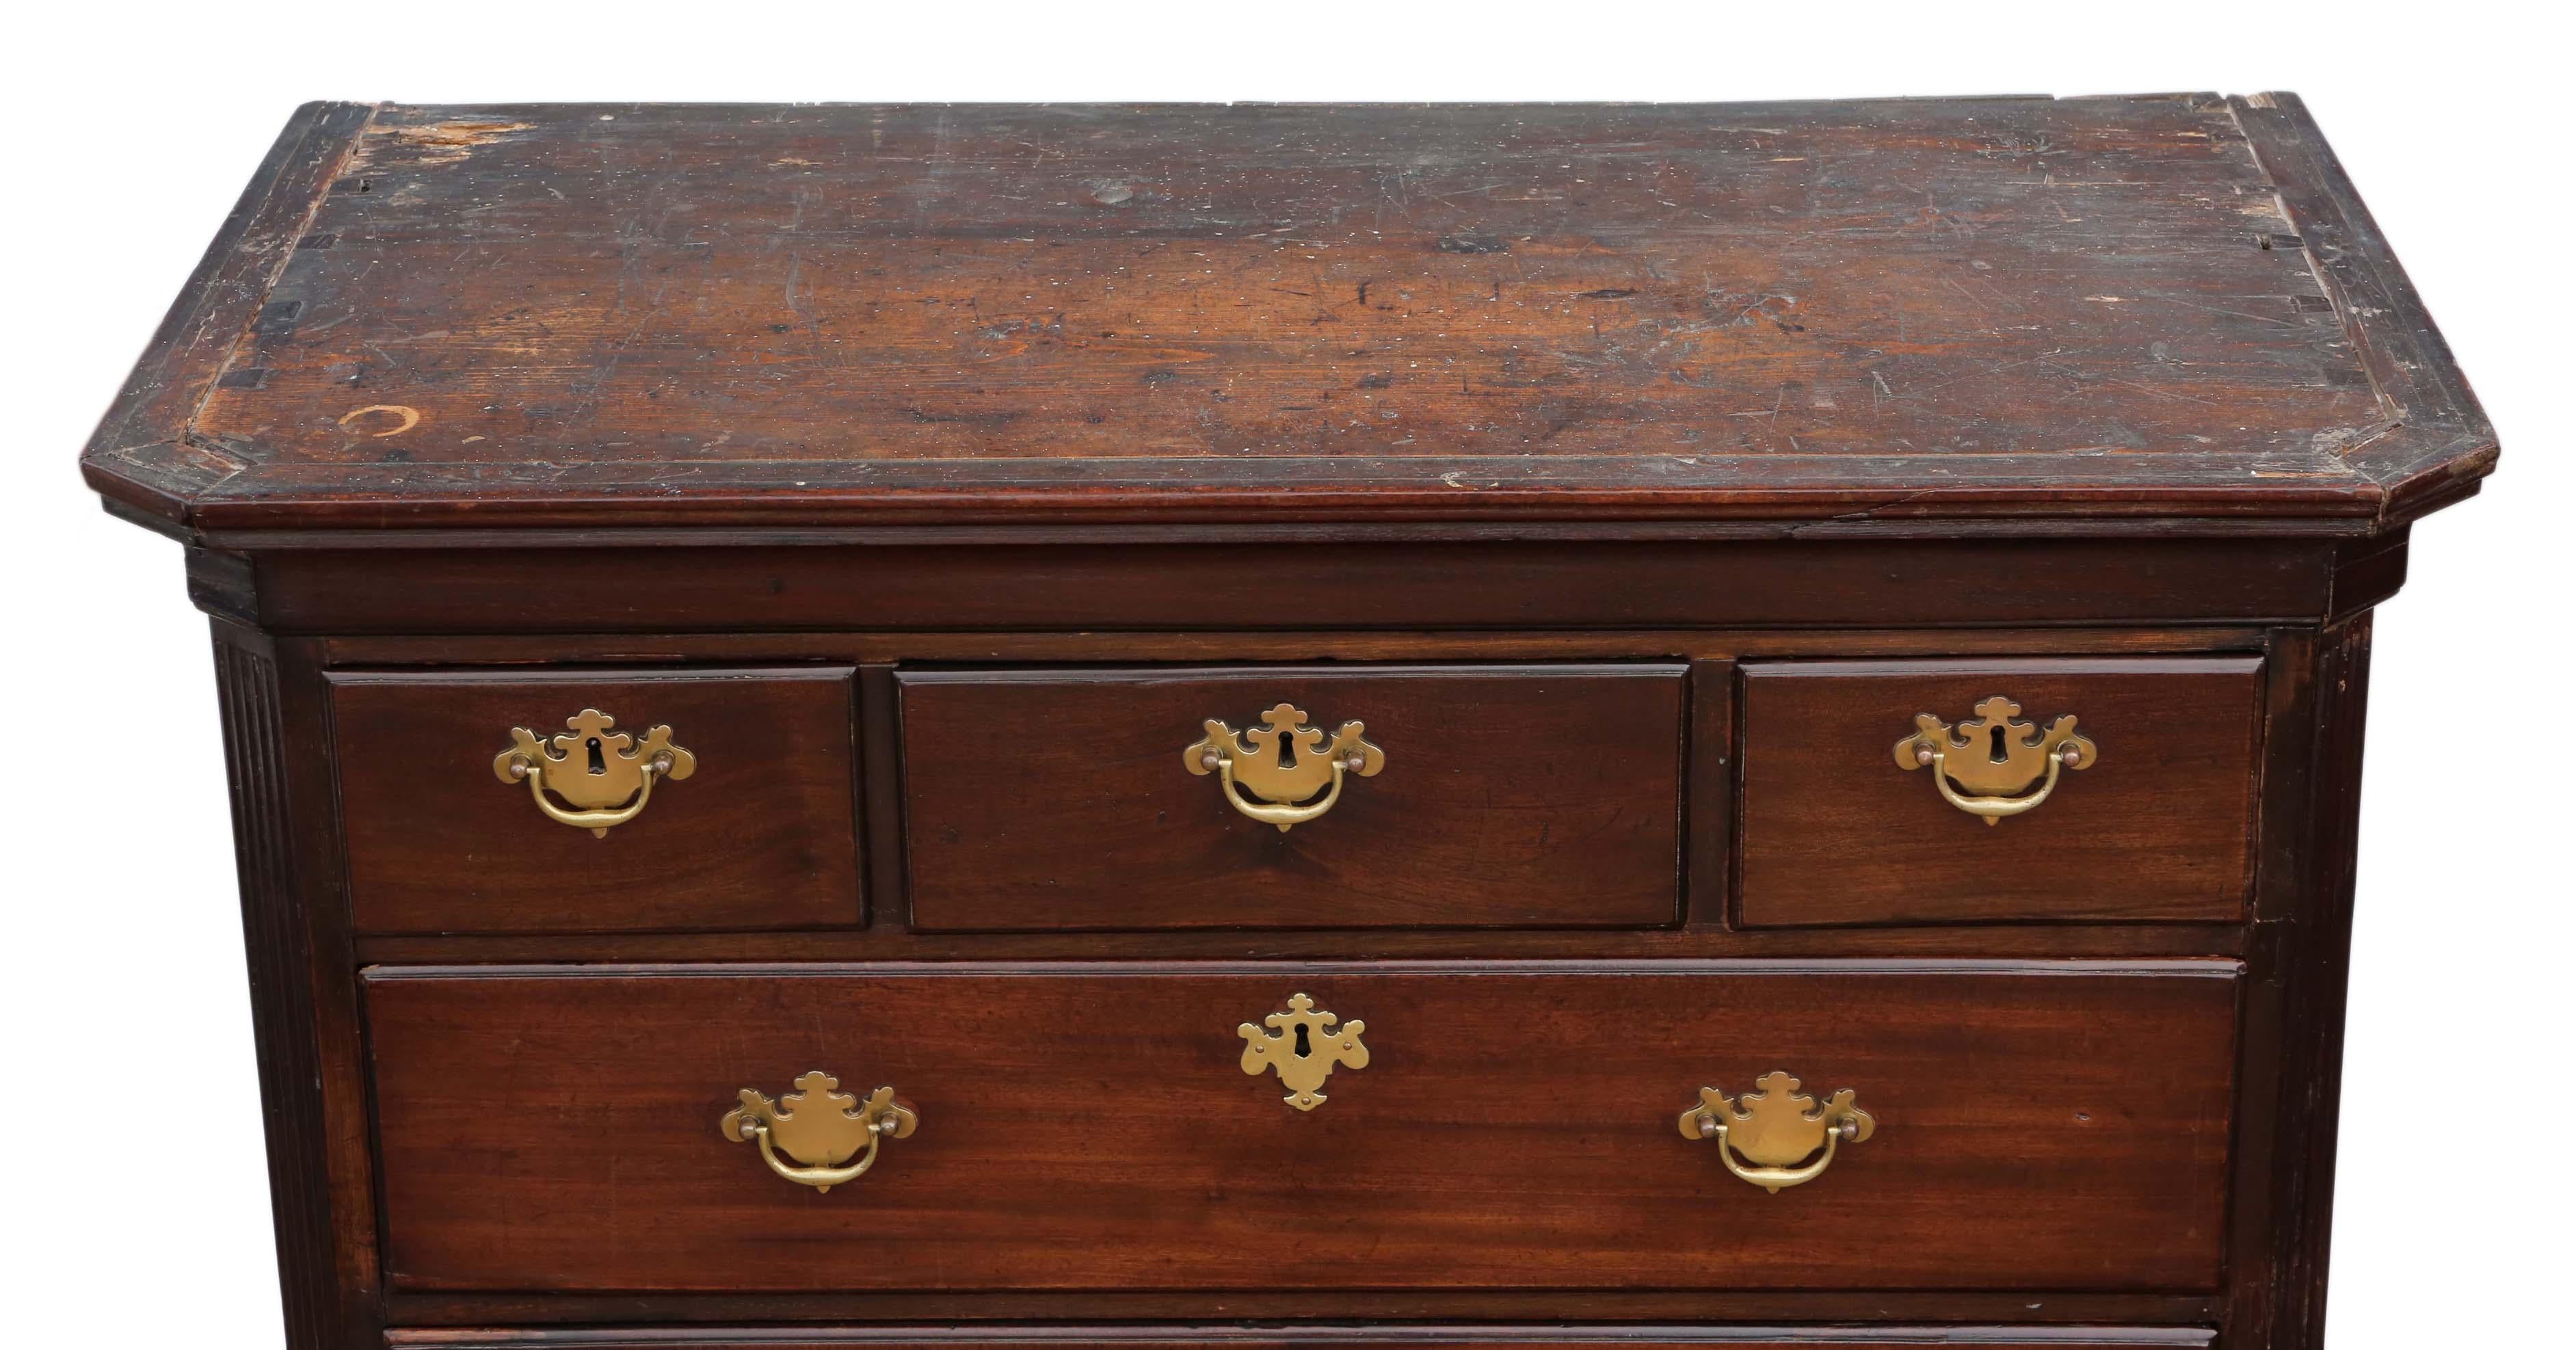 Georgian circa 1780 tallboy mahogany chest on chest of drawers.
Solid and strong... splits into two halves for transport. We have a key that fits all locks.

No loose joints and the oak lined drawers slide freely.

Full of age charm and